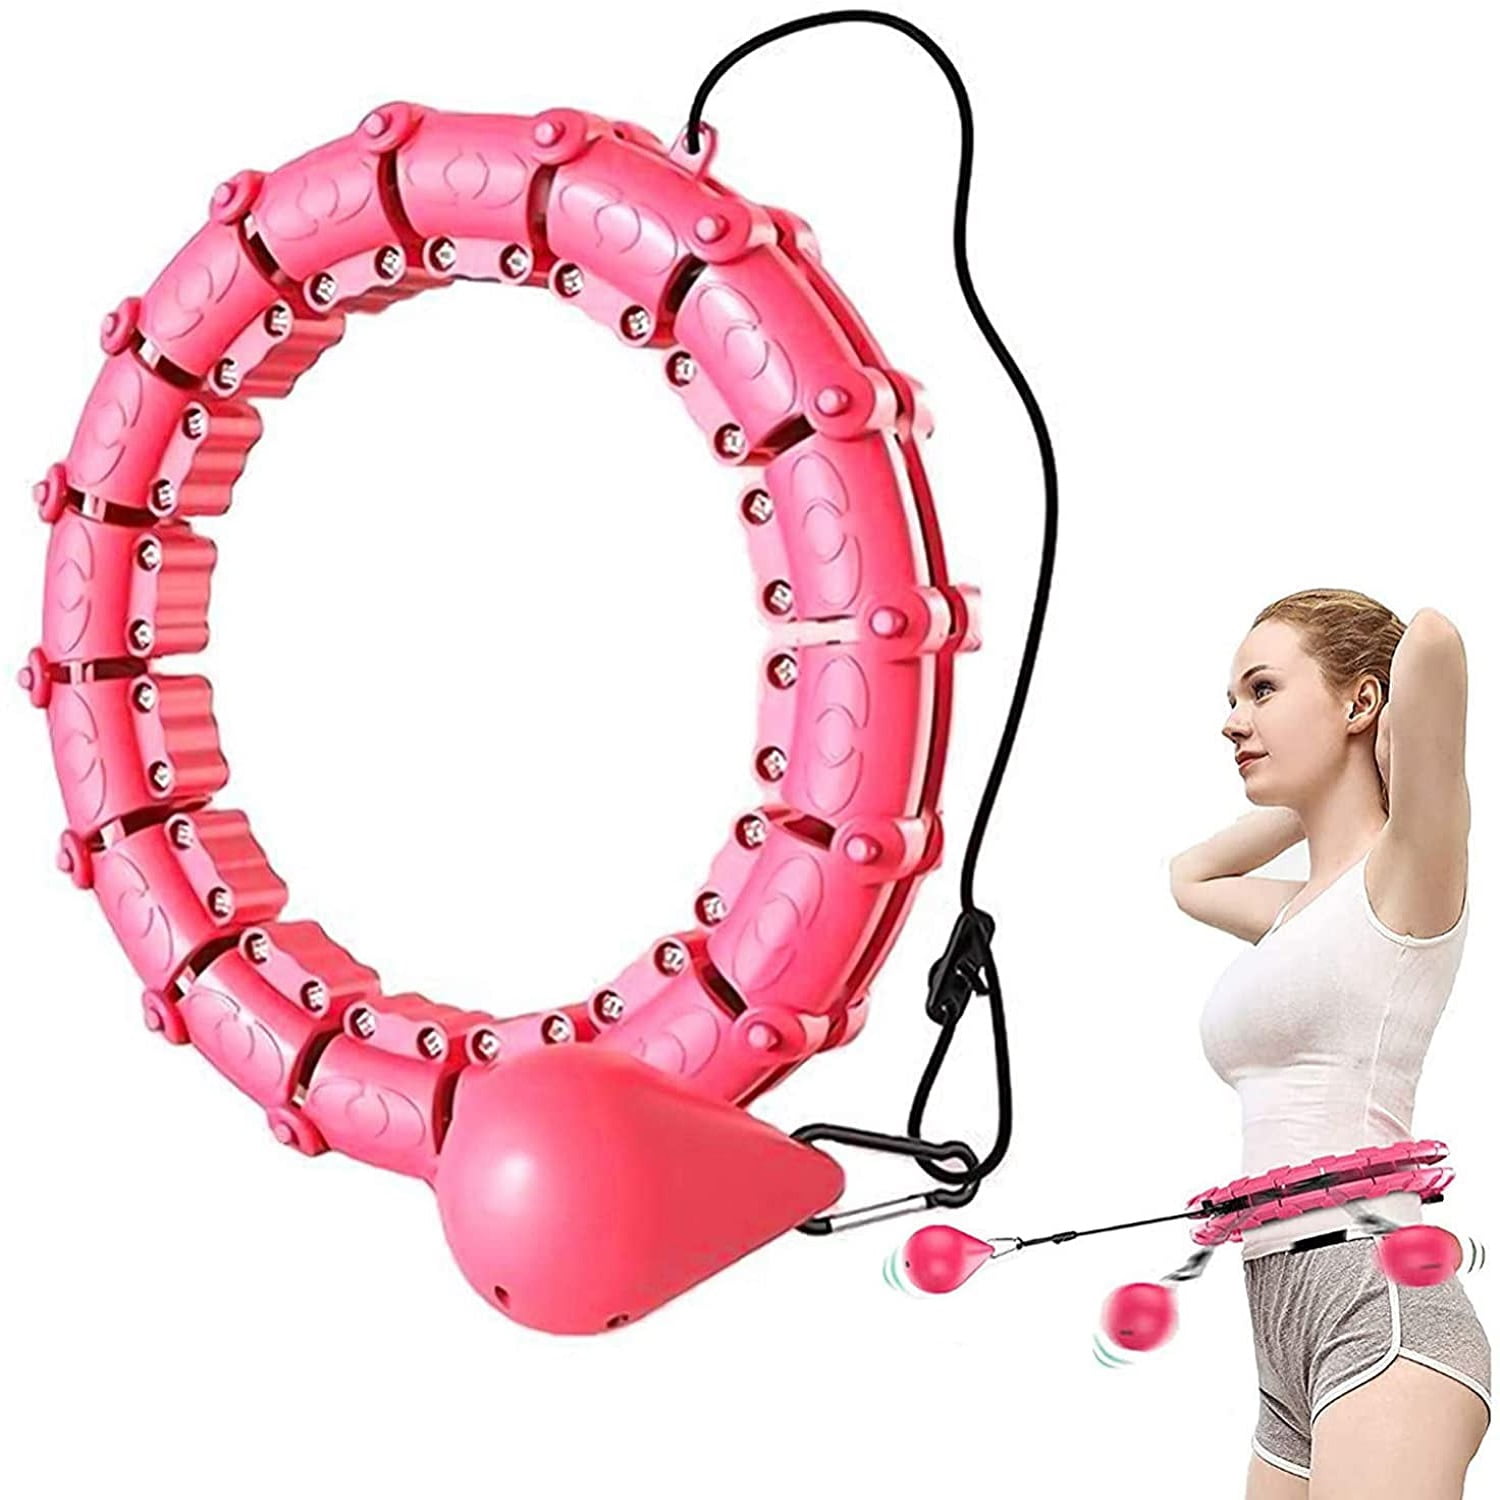 Adjustable Length 2 in 1 Abdomen Massage Fitness Hula Hoop with 18 Detachable Knots and Auto-Spinning Ball Smart Weighted Hula Hoop for Weight Loss 